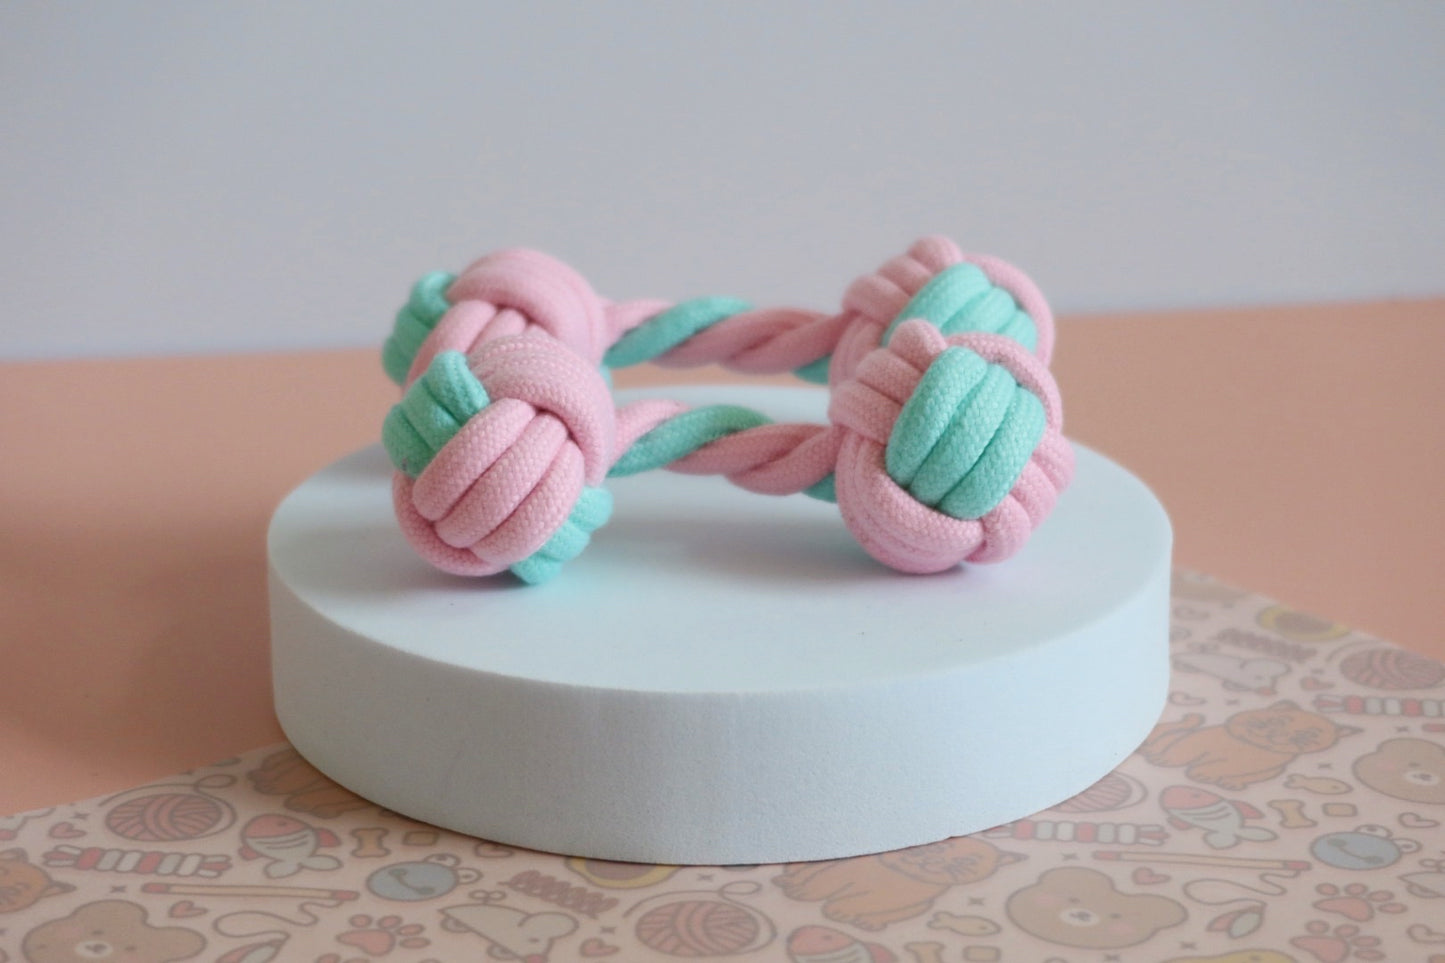 Pink & Mint Rope Dog Toys / Puppy Gift - Tug of war